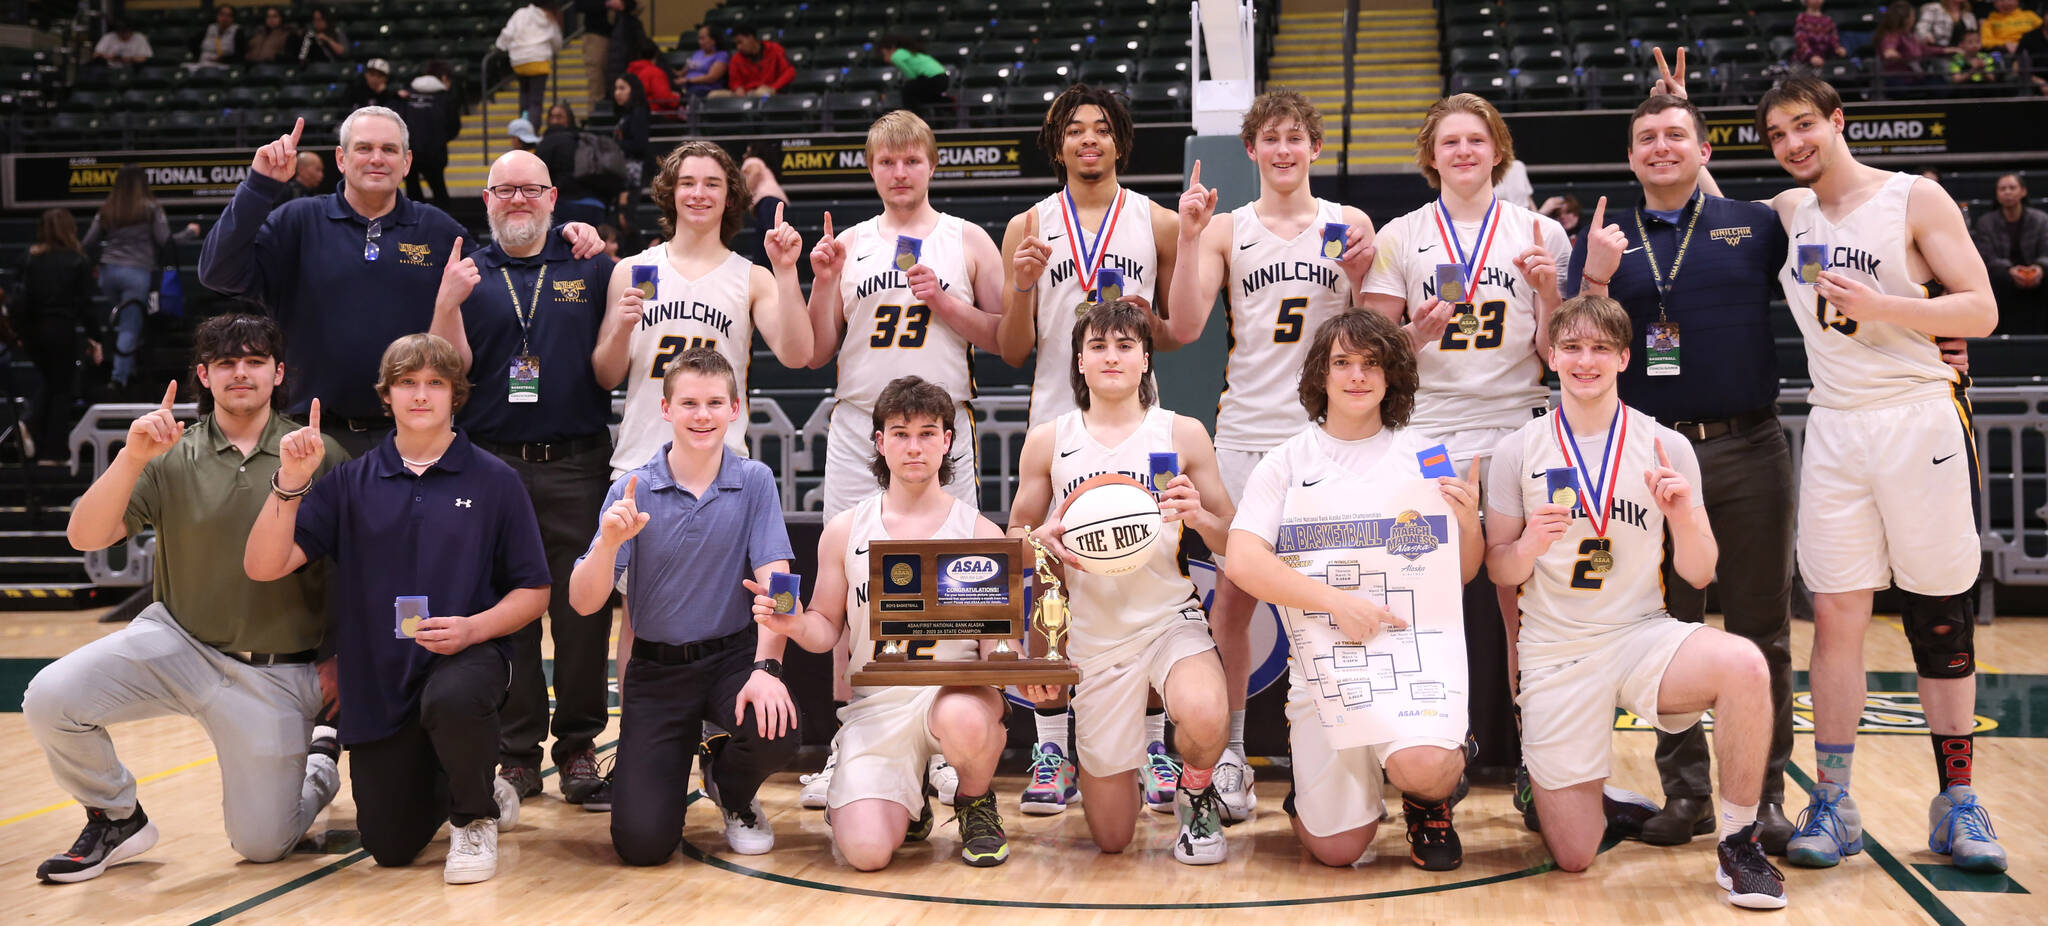 Photo courtesy of Robin Moore
The Ninilchik boys basketball team celebrates their second straight Class 2A state championship Saturday, March 18, 2023, at the Alaska Airlines Center in Anchorage, Alaska.